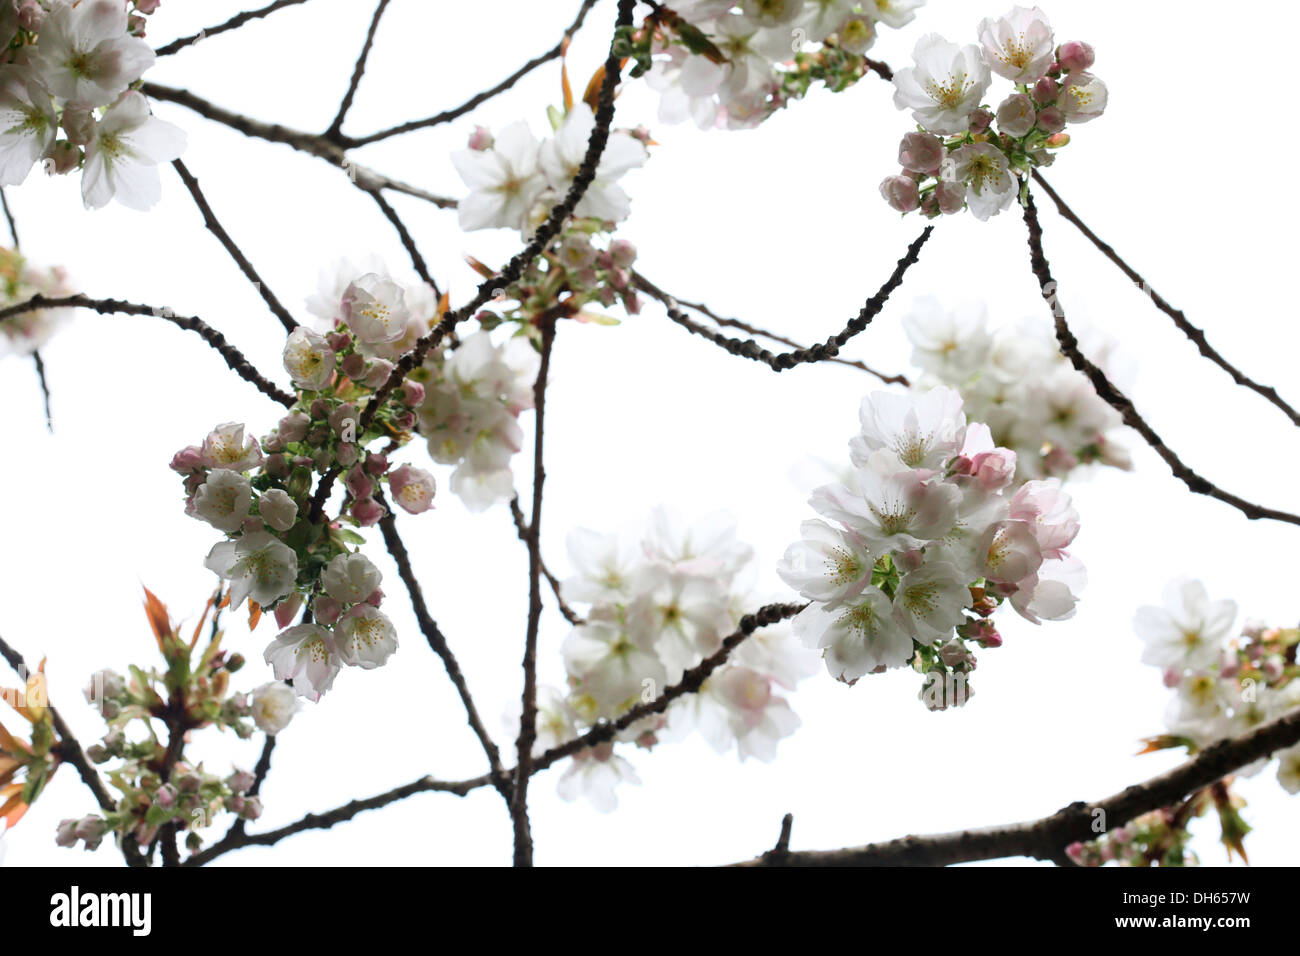 a taste of spring, beautiful clusters of great white cherry blossom Tai Haku  Jane Ann Butler Photography JABP1020 Stock Photo